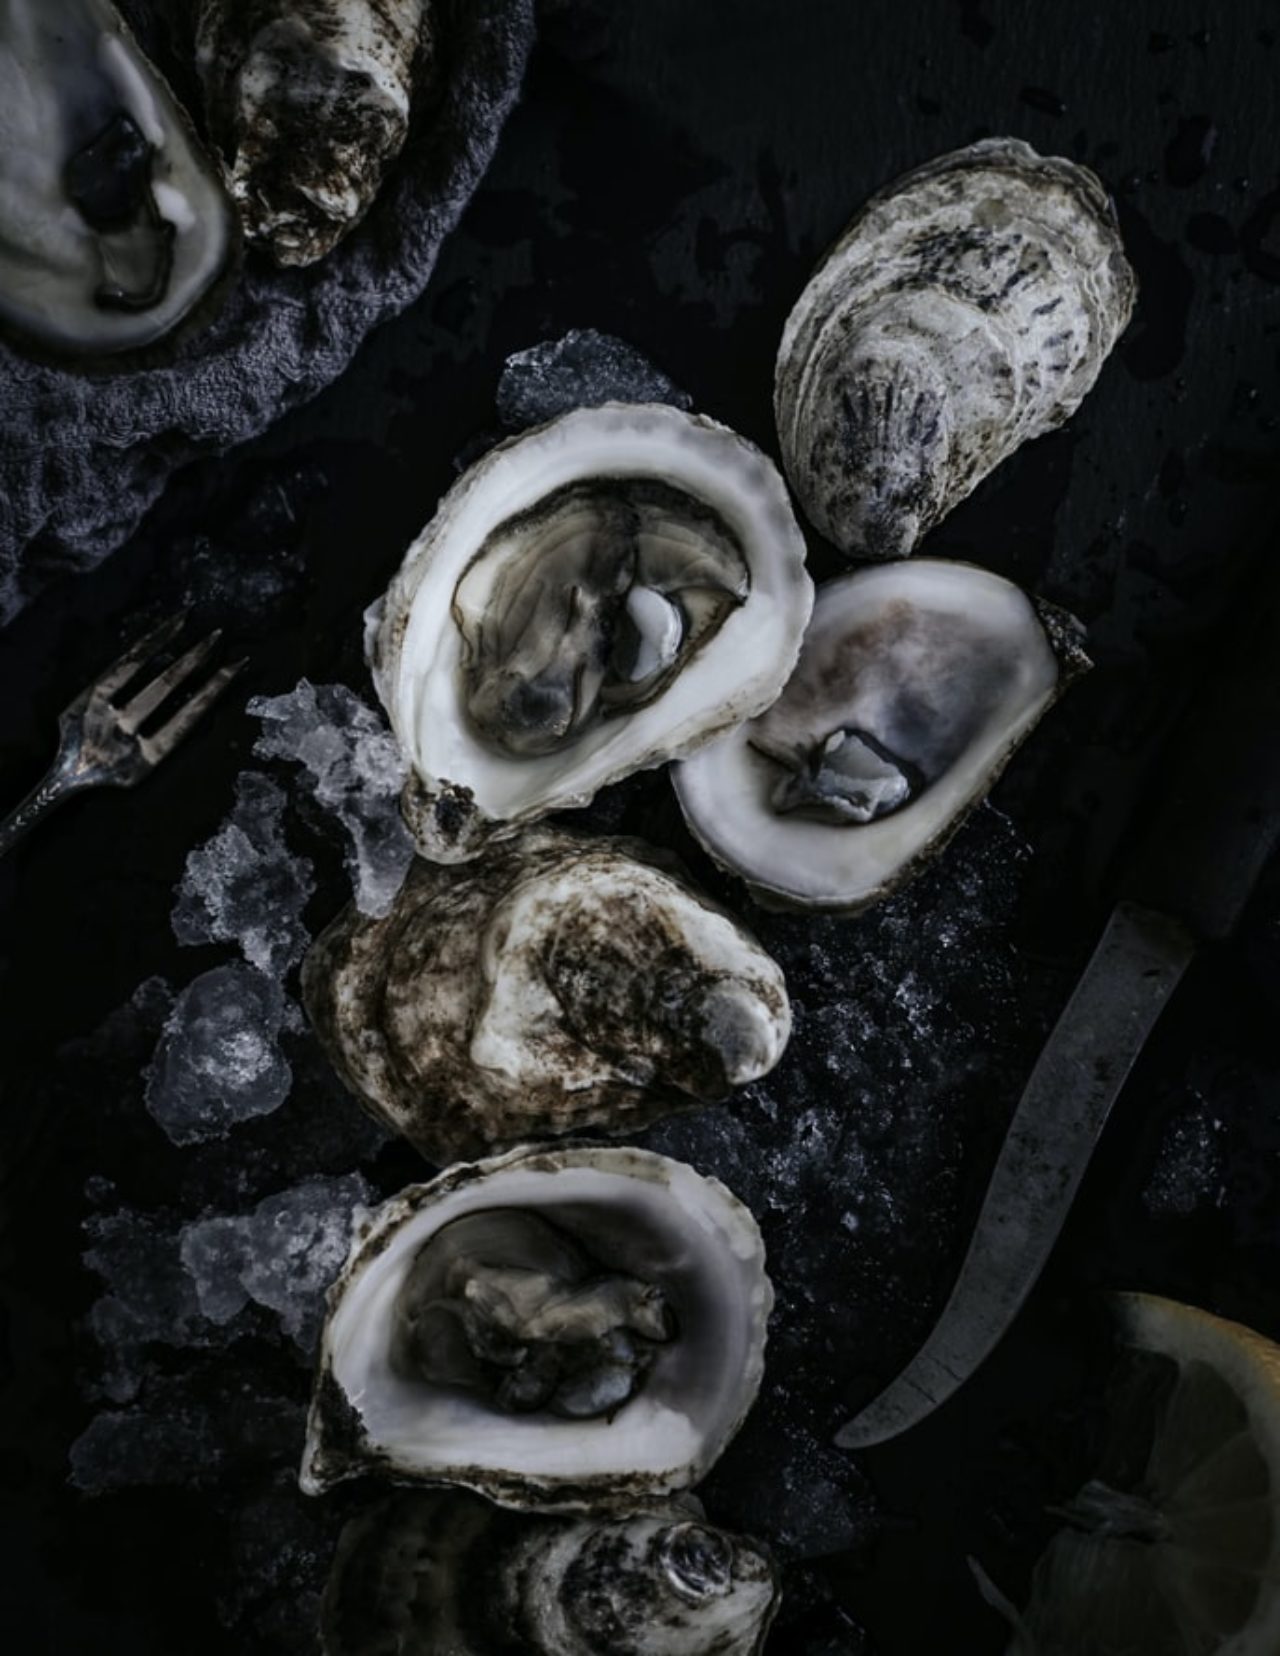 Oysters on a dark background for our Des Moines Hotels Wednesdays Wine & Oysters event